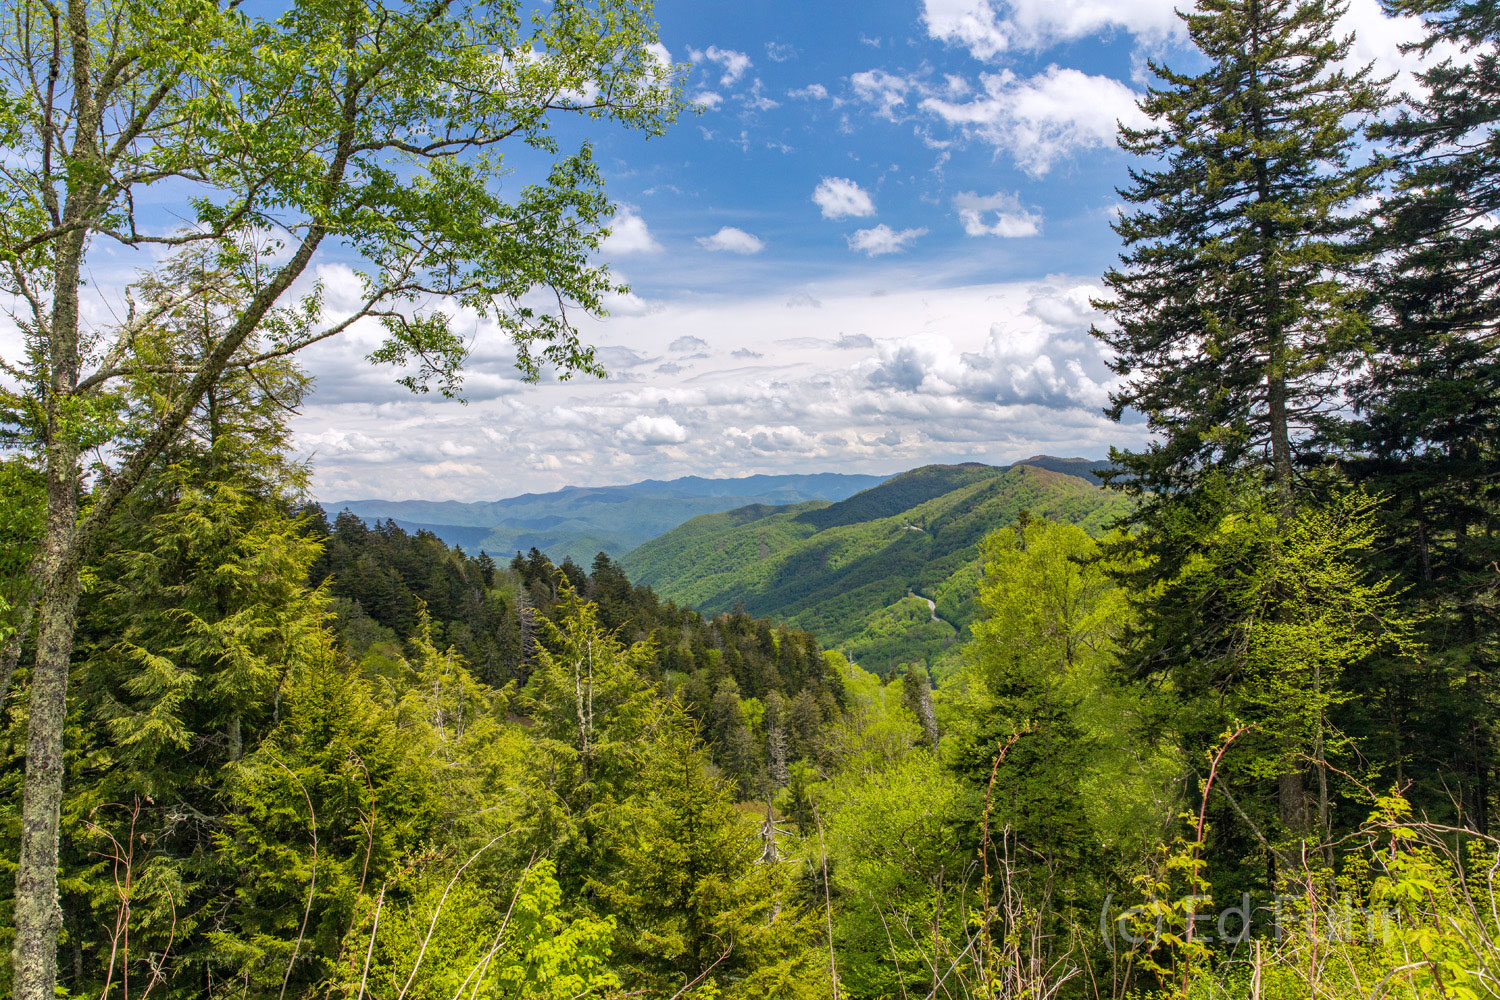 The greens of spring create a beautiful palette atop Newfound Gap.